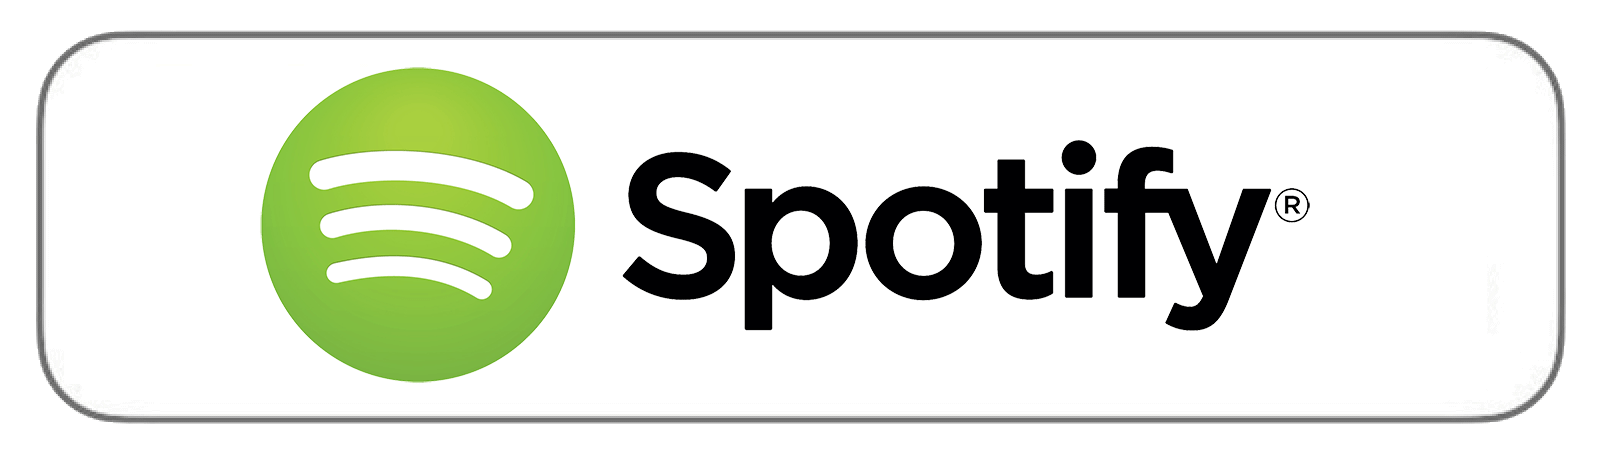 spotify podcast badge wht grn 660x160